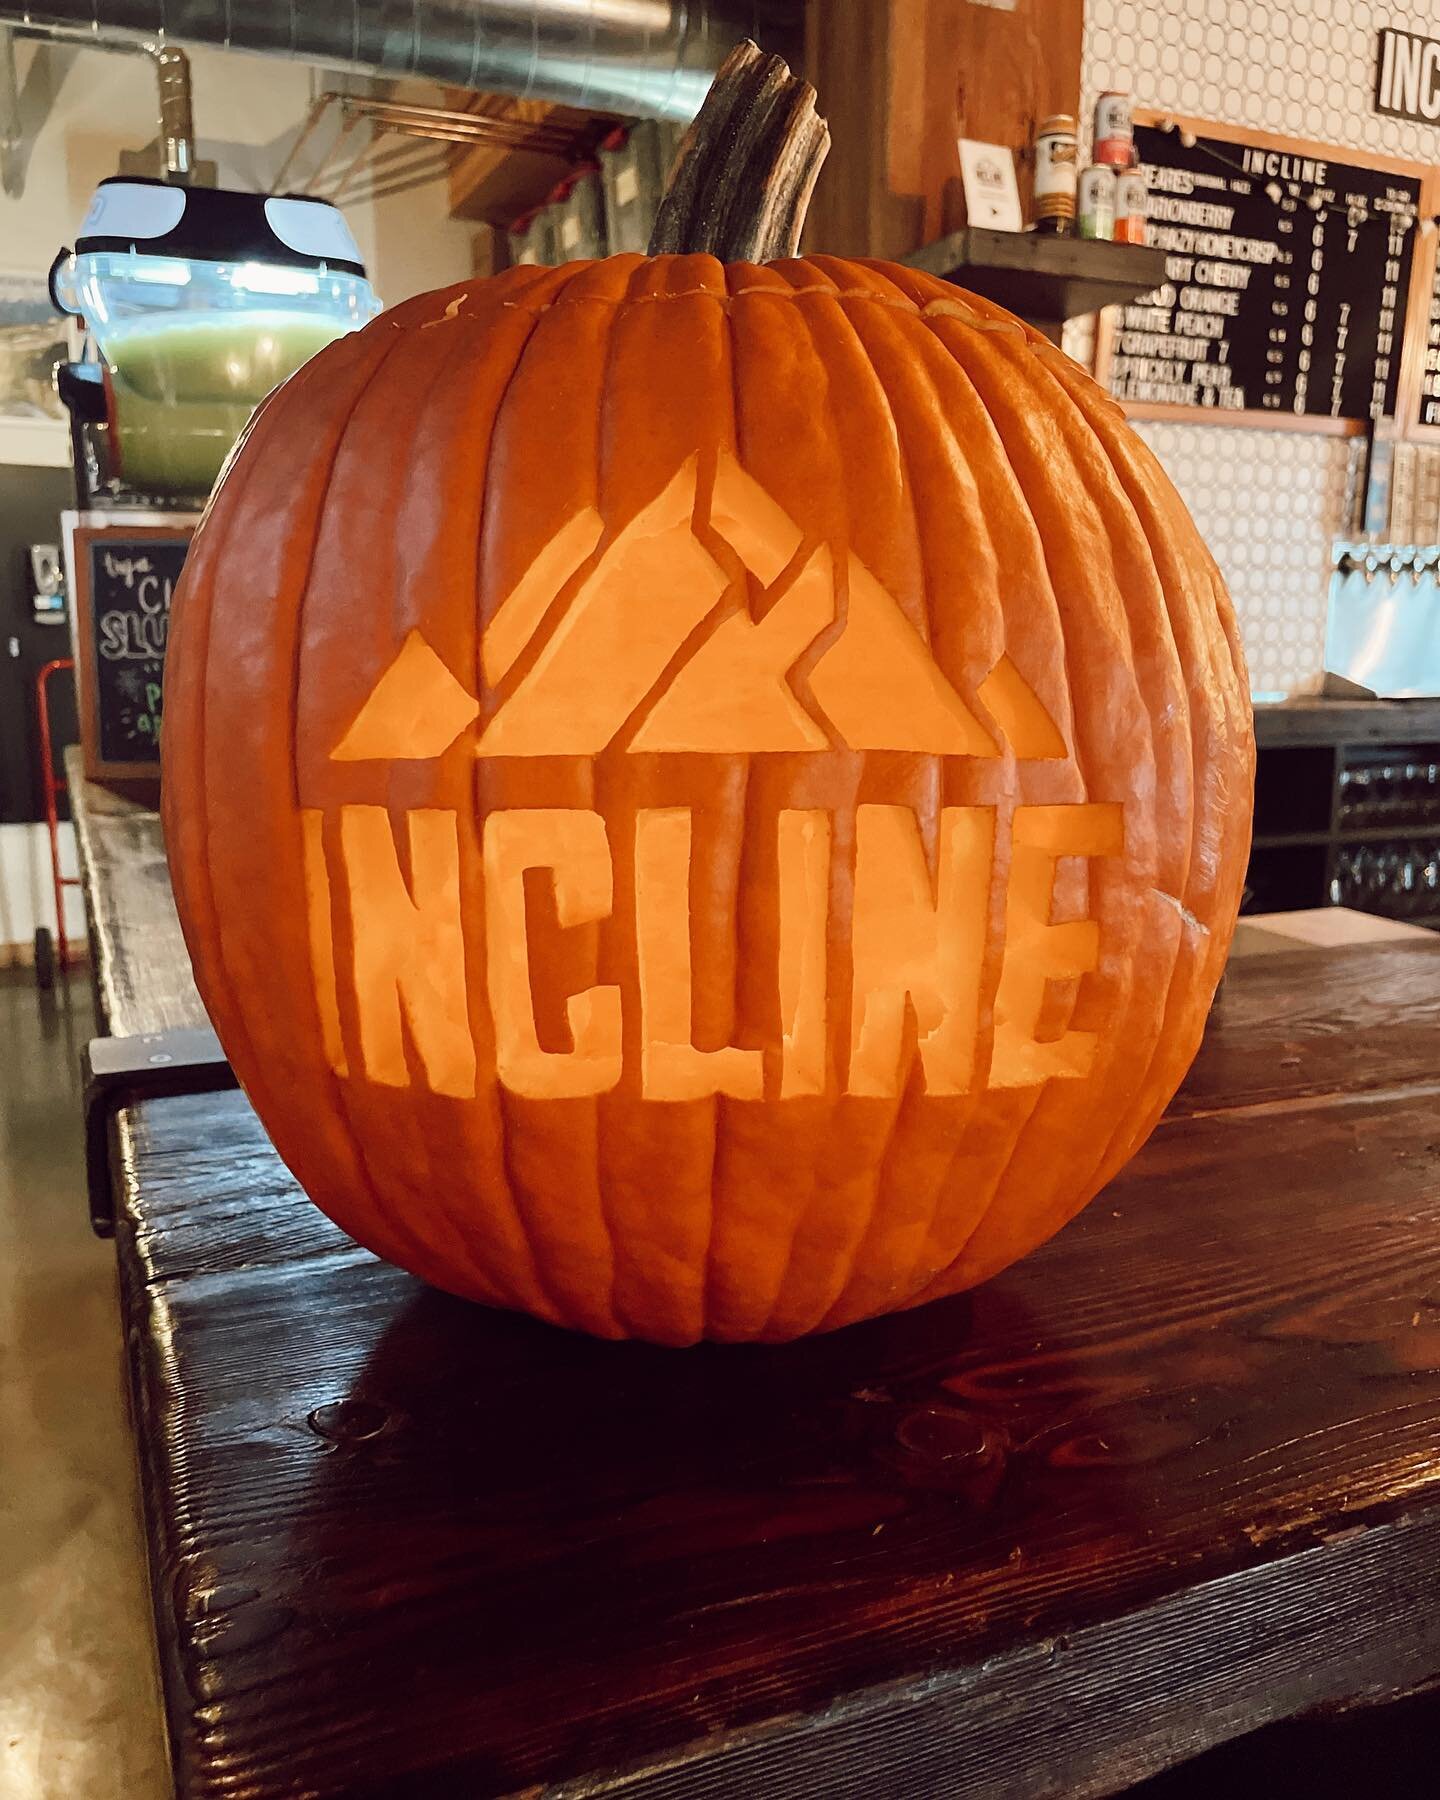 🎃🎃🎃 

Closed today // Back open for some Halloween fun tomorrow at 2pm!! 
#cider #inclinecider #inclinecidercompany #ciderbar #familyowned #tacomataproom #hardcider #gritcity #craftcider #pnwcider #fallcider #happyhalloween